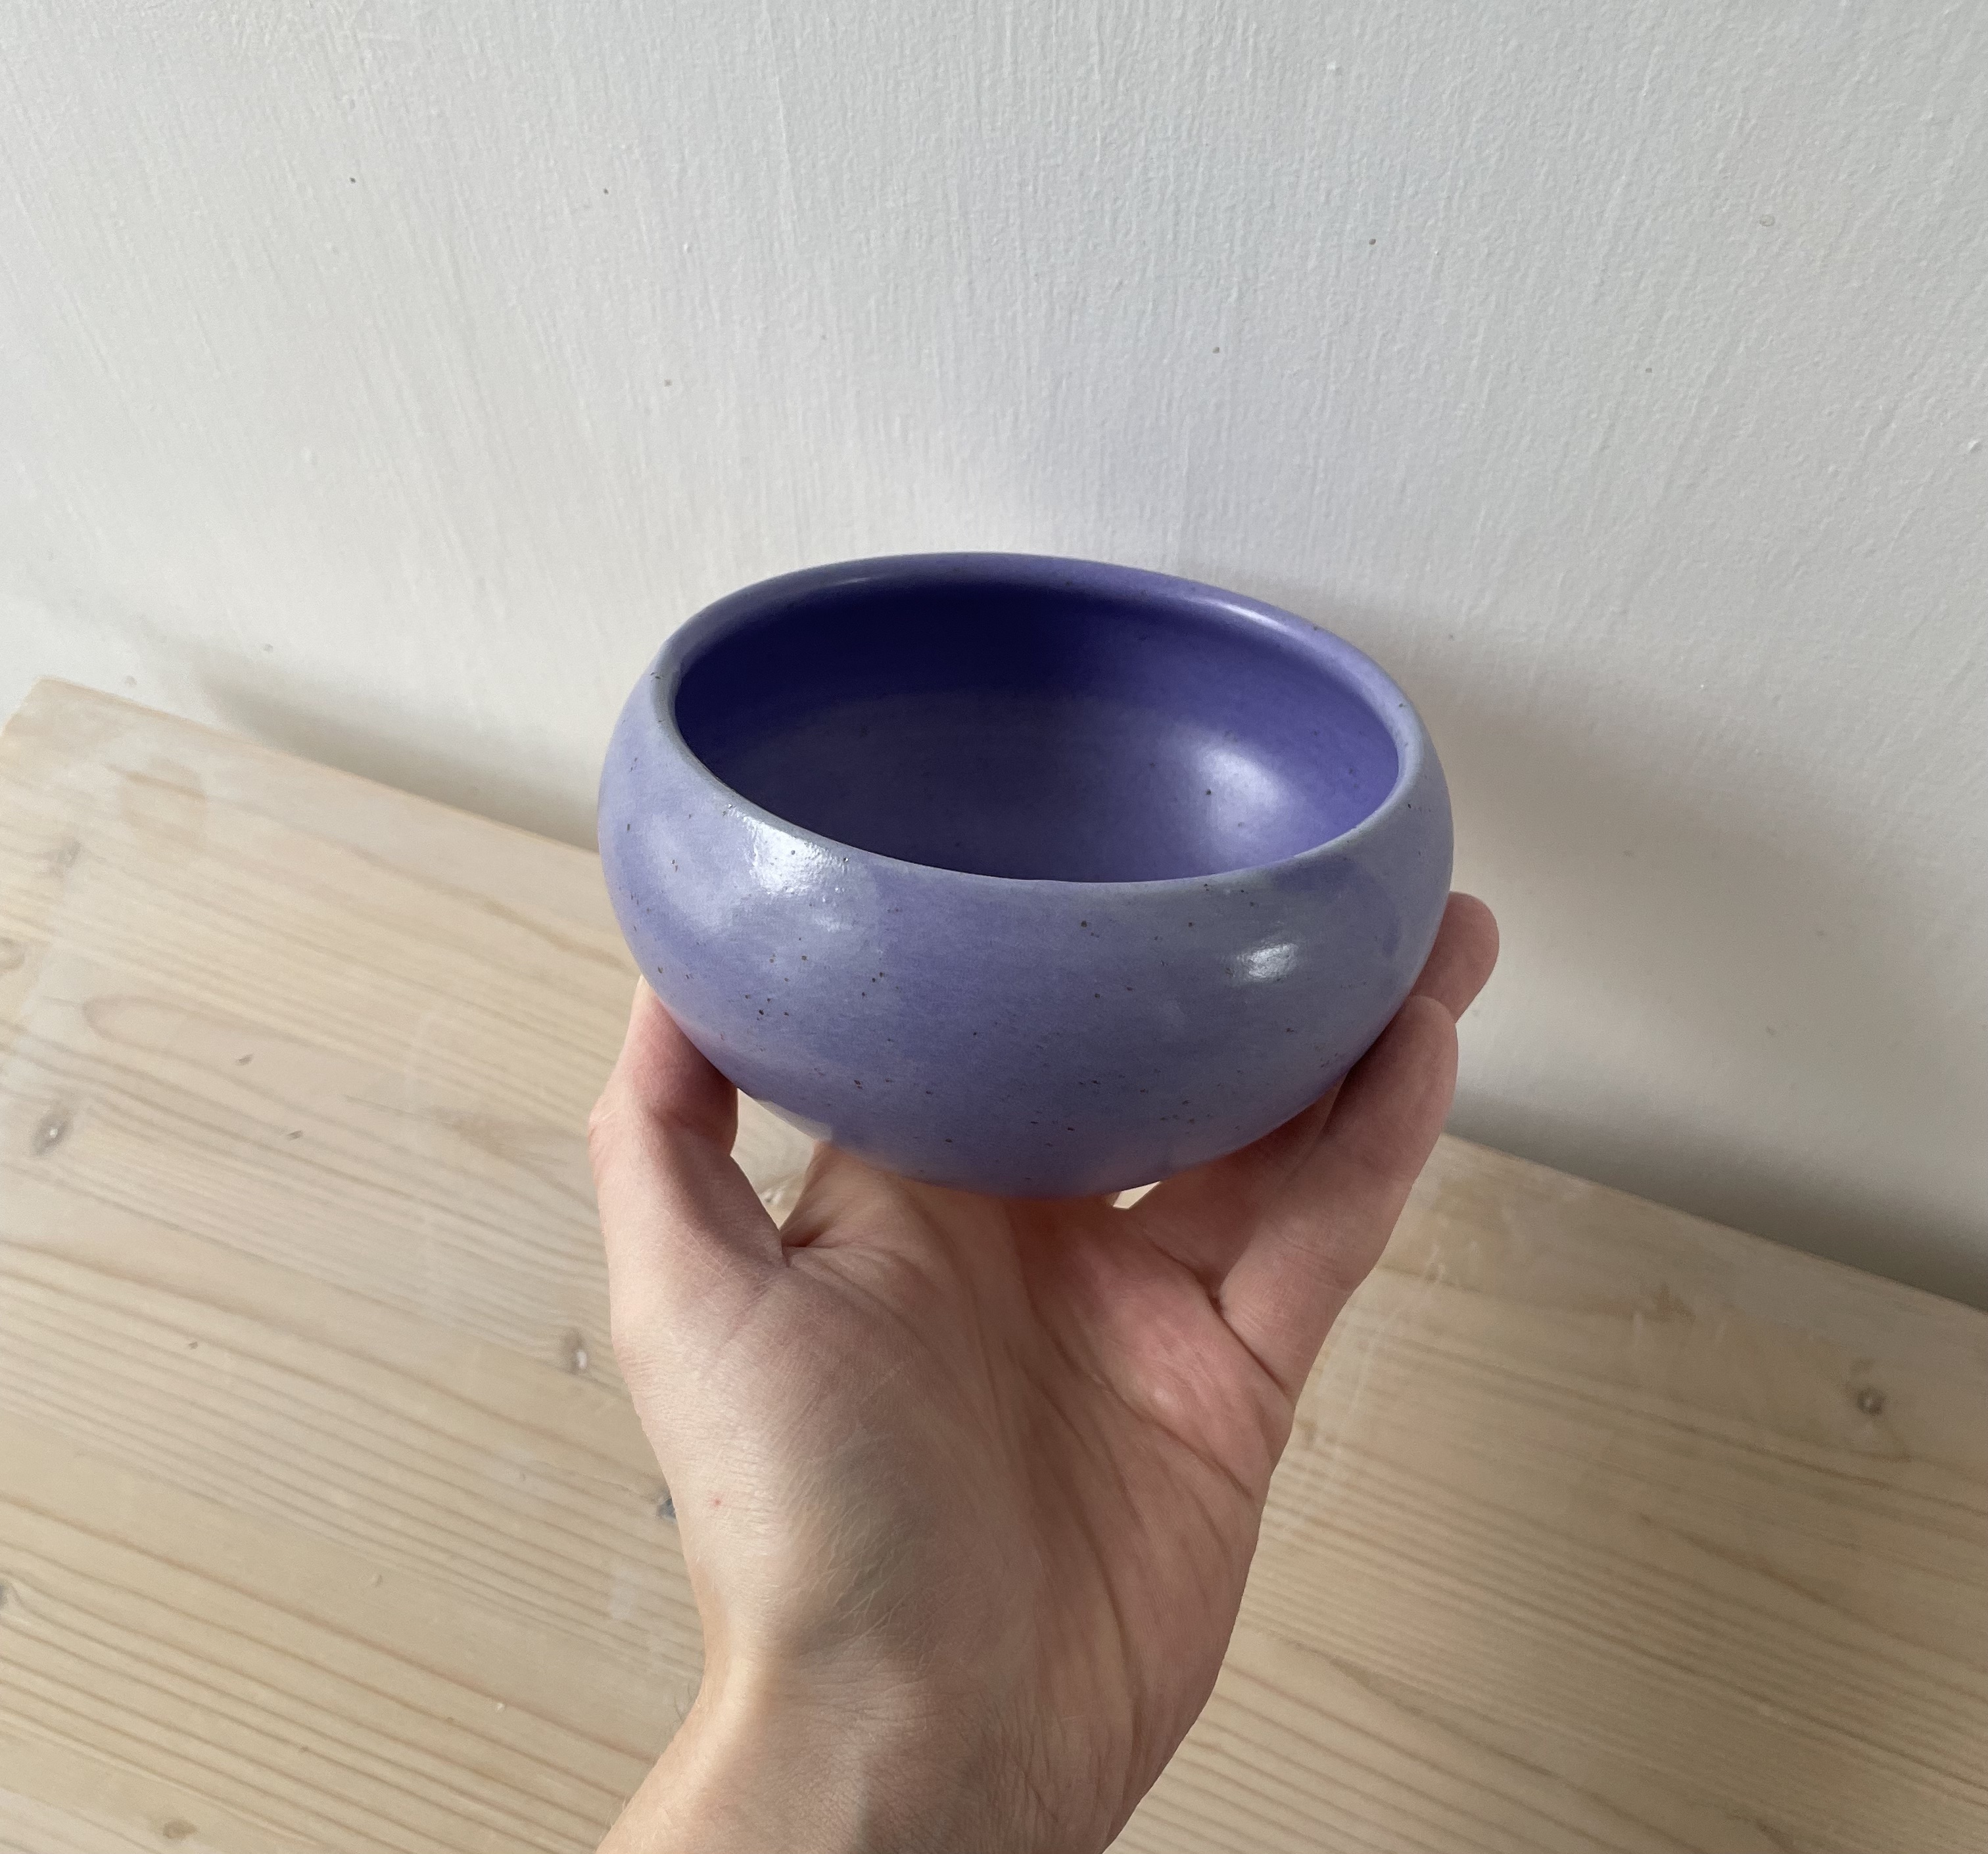 Small rounded bowl